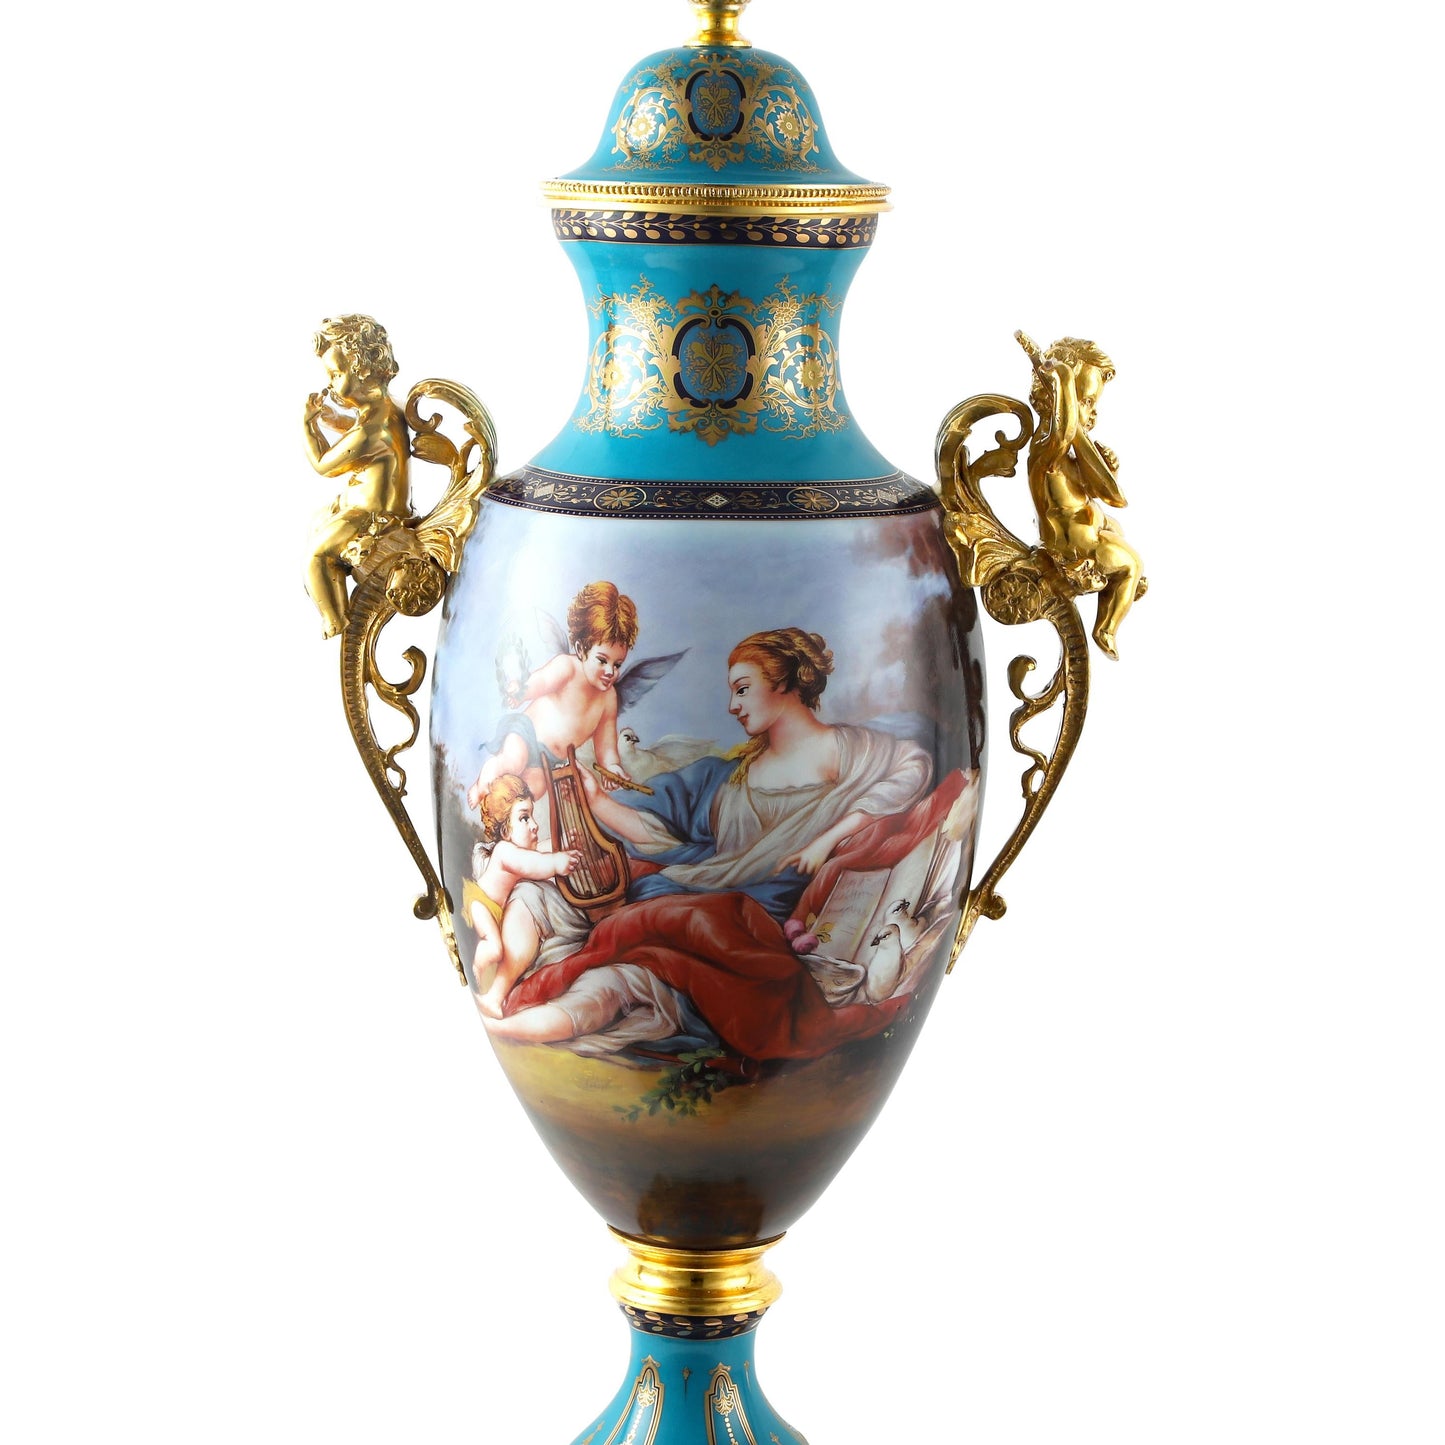 DECOELEVEN ™ Bronze and Porcelain Louis XV Style Jar with Cherub Handles